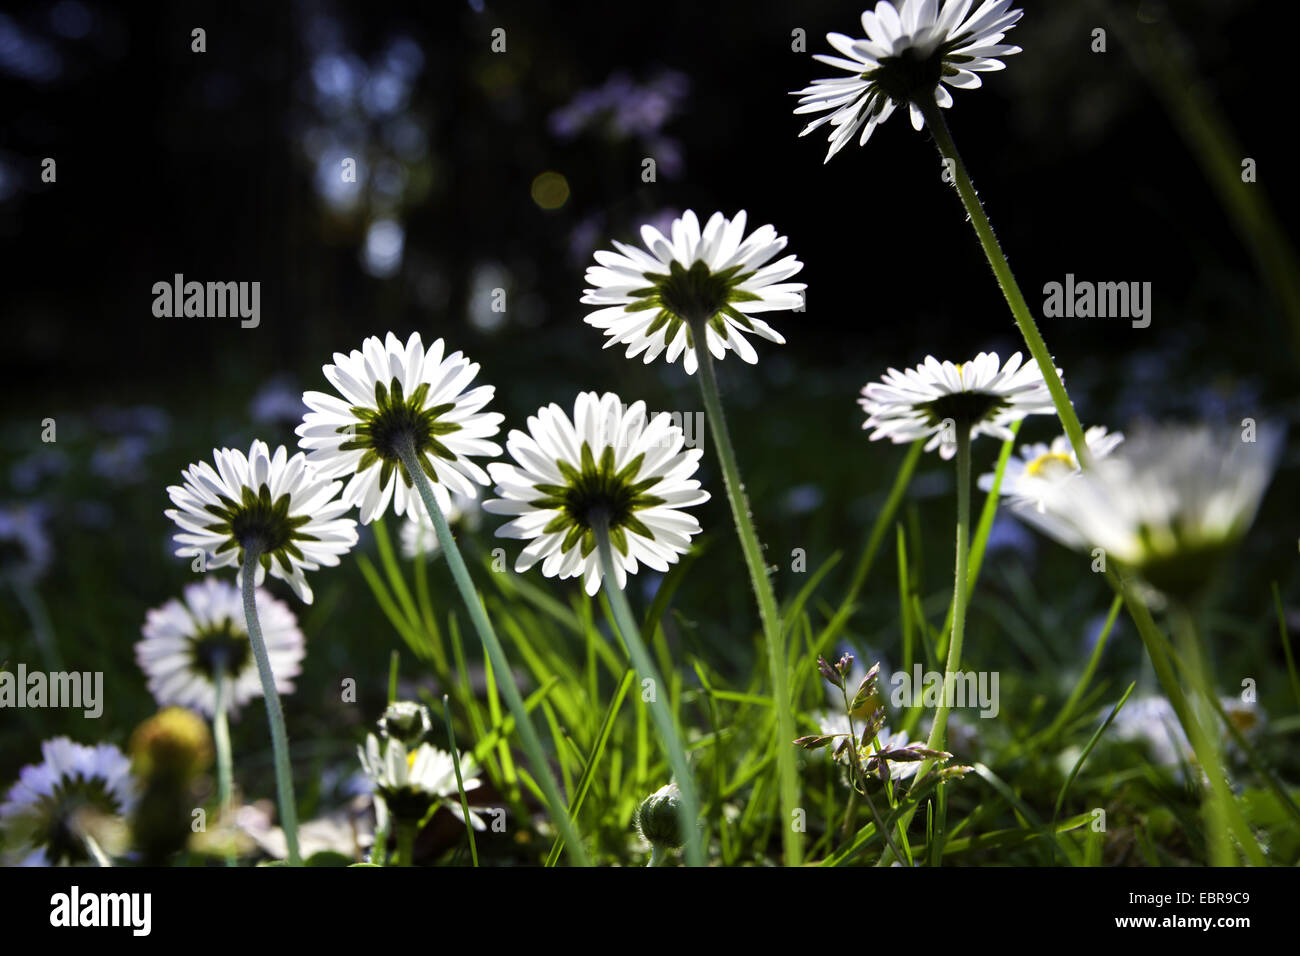 common daisy, lawn daisy, English daisy (Bellis perennis), in the sunlight in a meadow Stock Photo